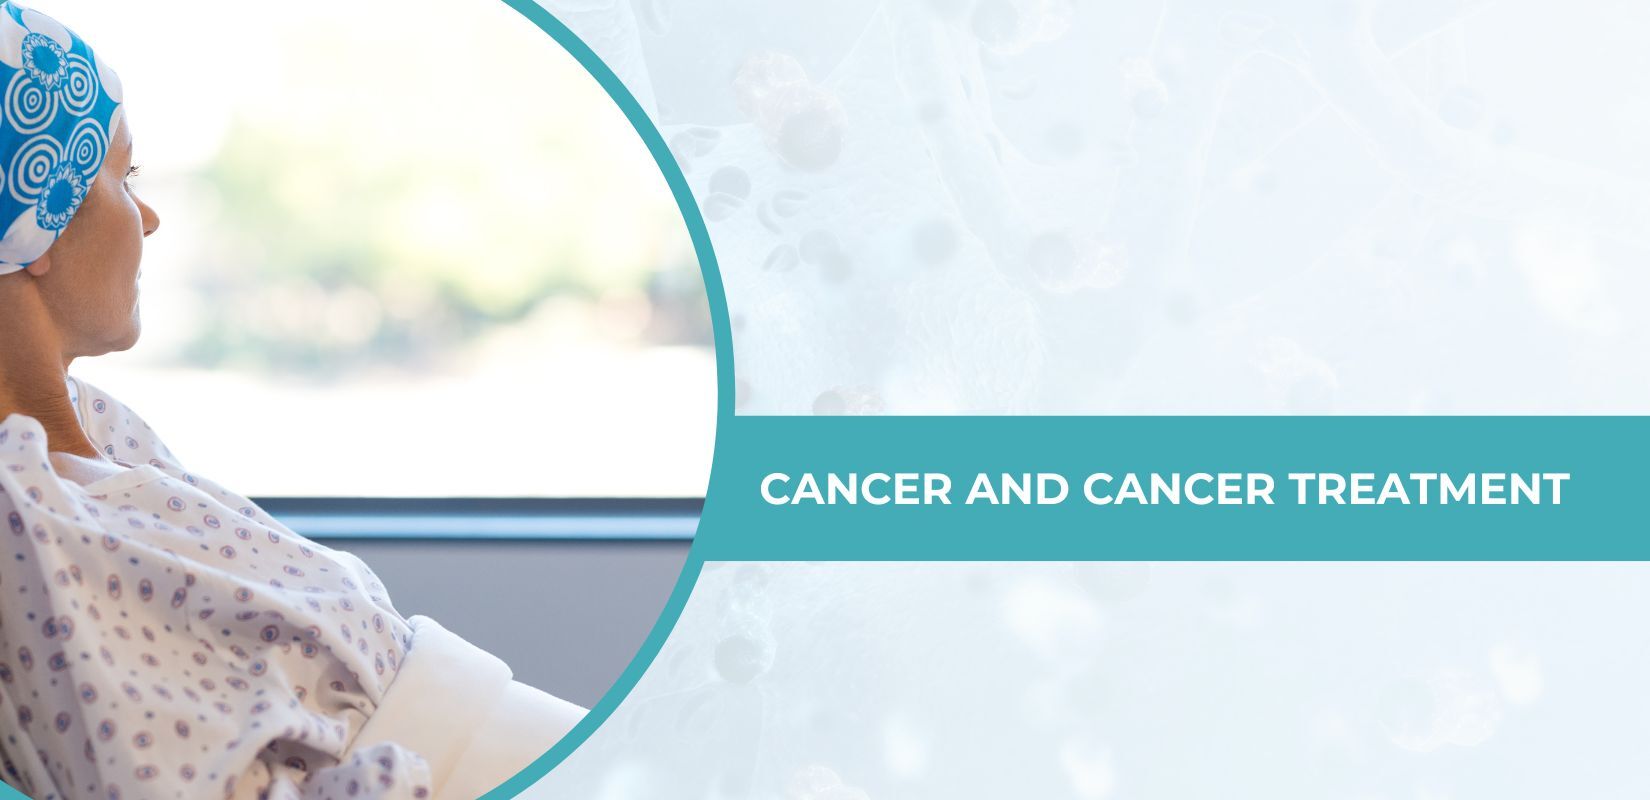 Cancer and Cancer Treatment